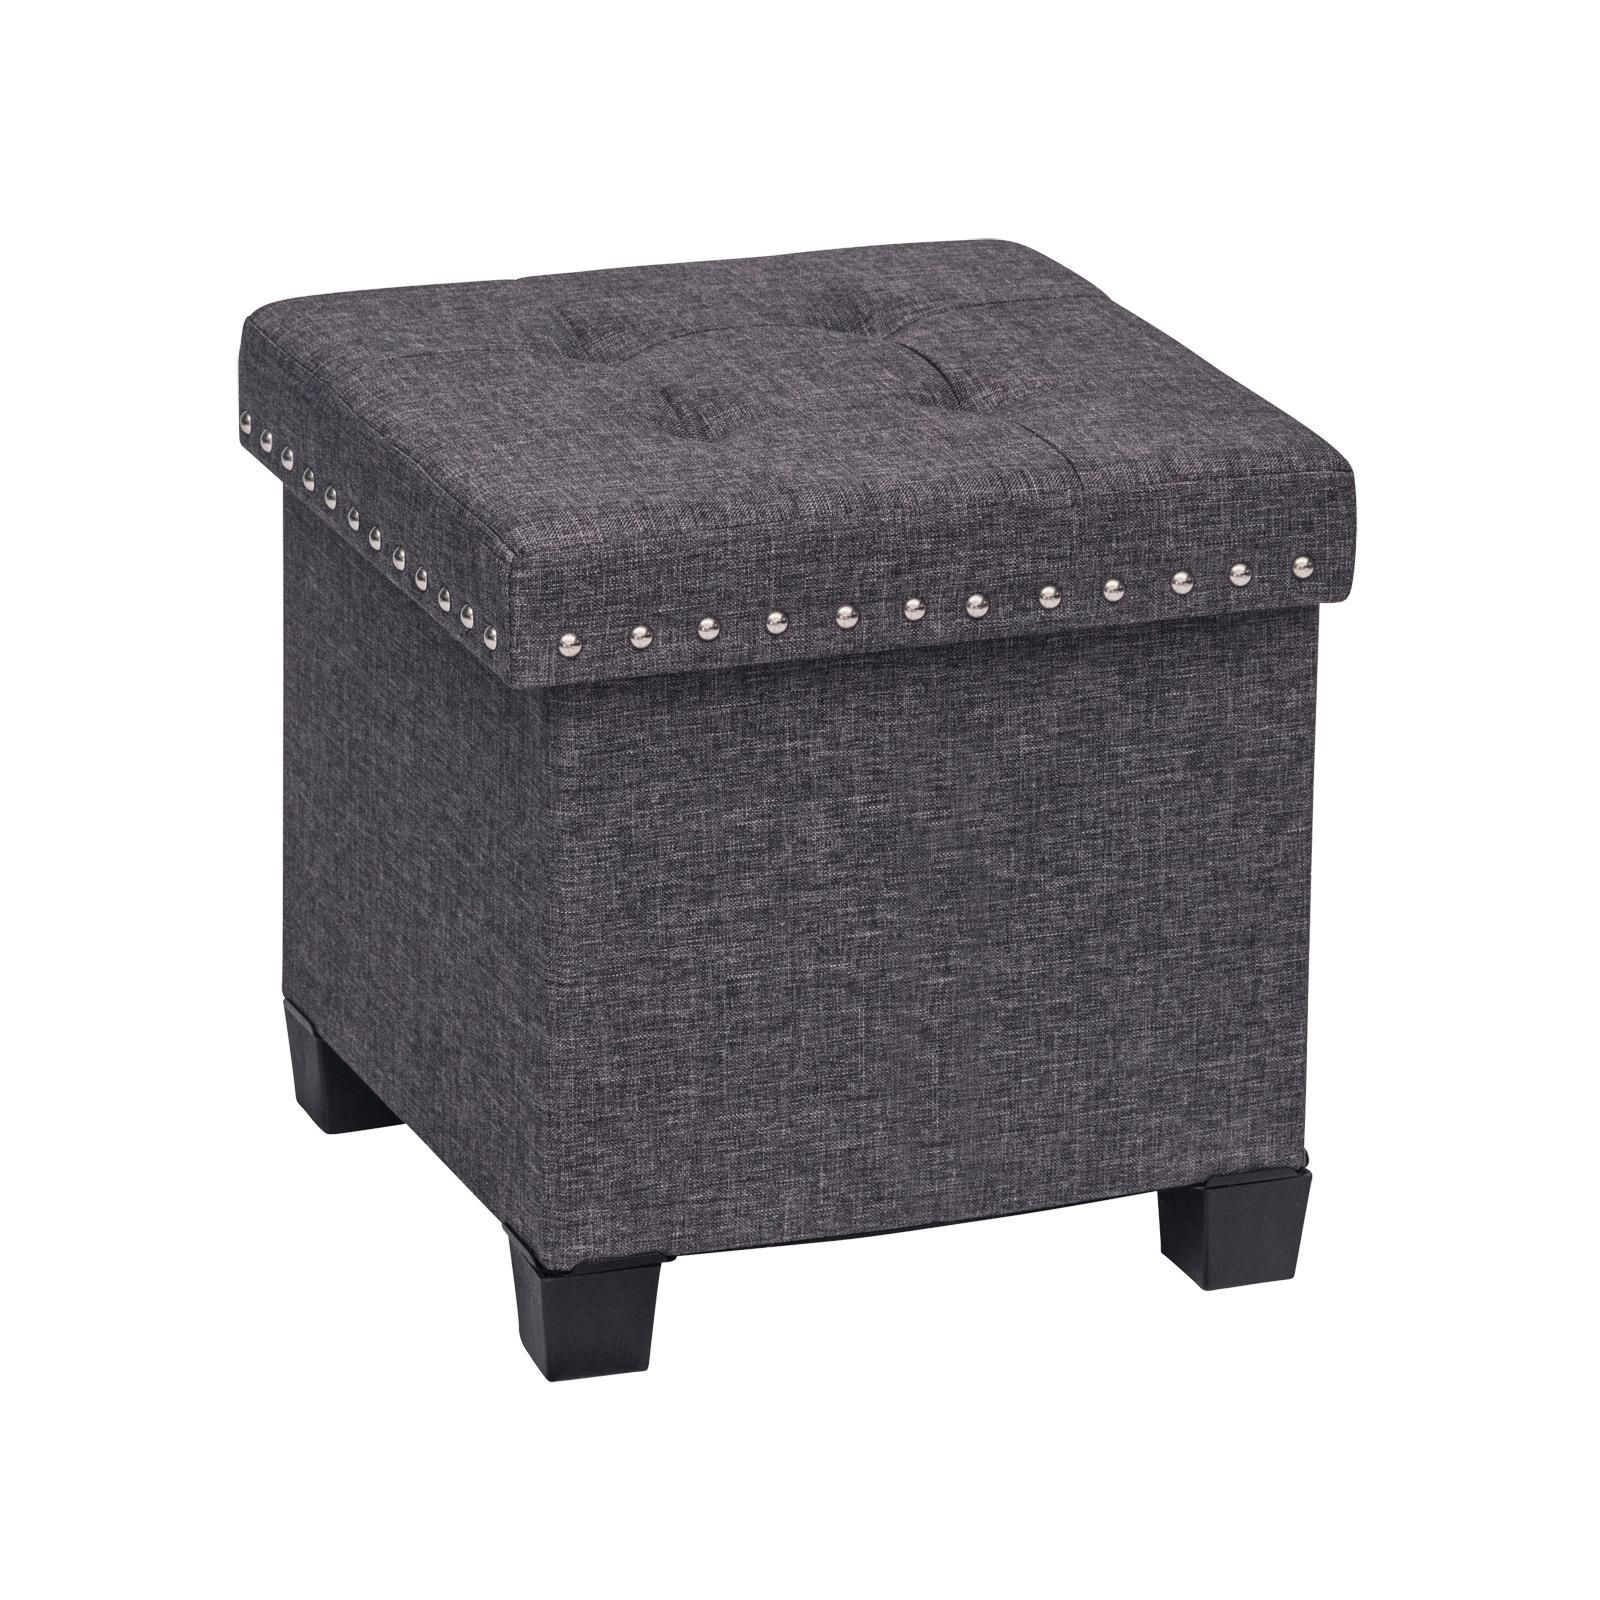 Nathan James Payton Foldable Cube Storage Ottoman Footrest And Seat Within Solid Cuboid Pouf Ottomans (View 7 of 20)